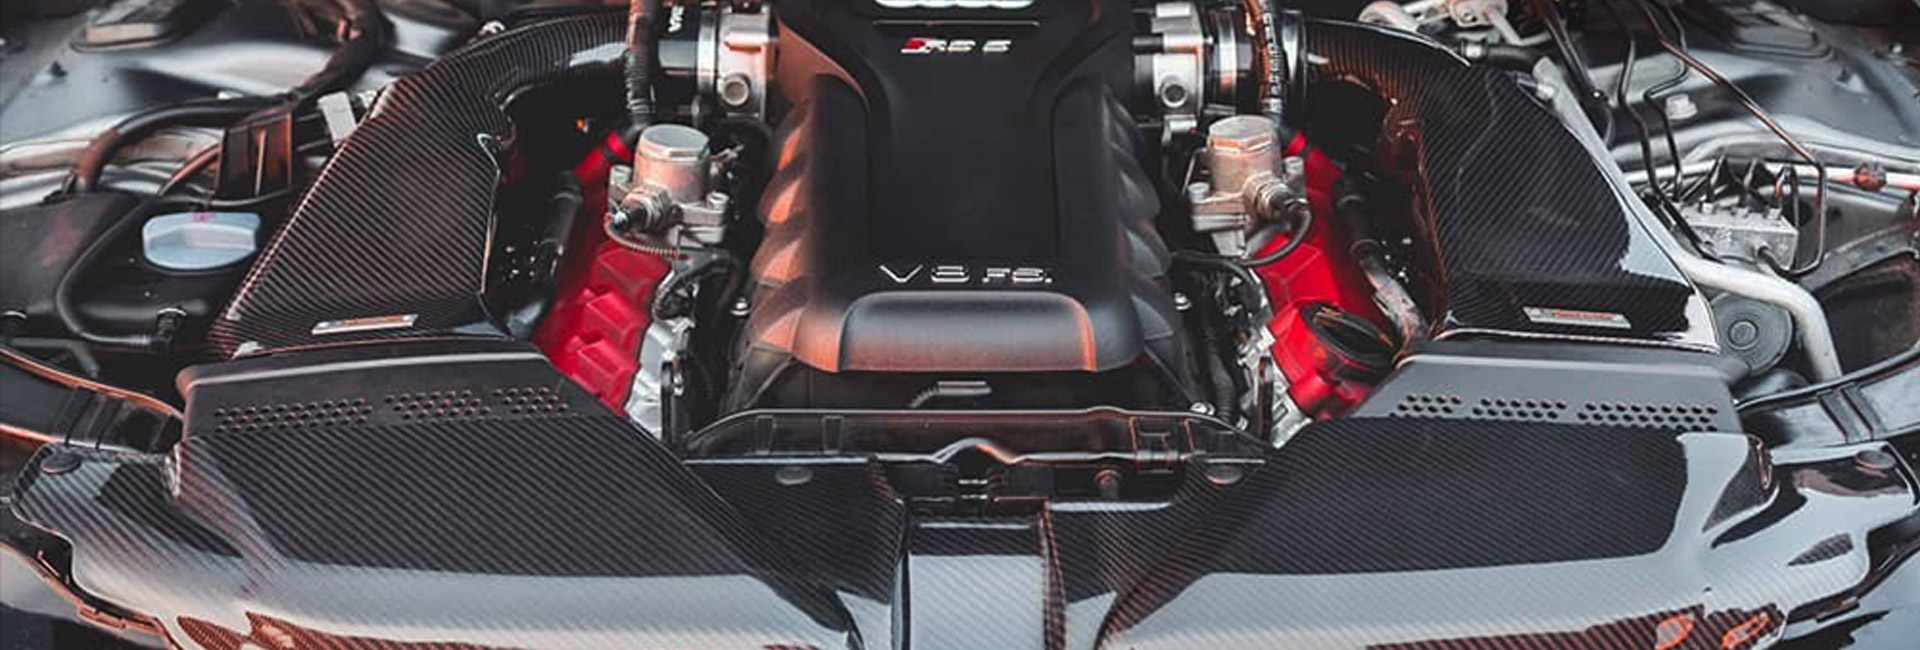 Armaspeed Europe Blog - Carbon cold air intake - Do Cold Air Intakes actually work?